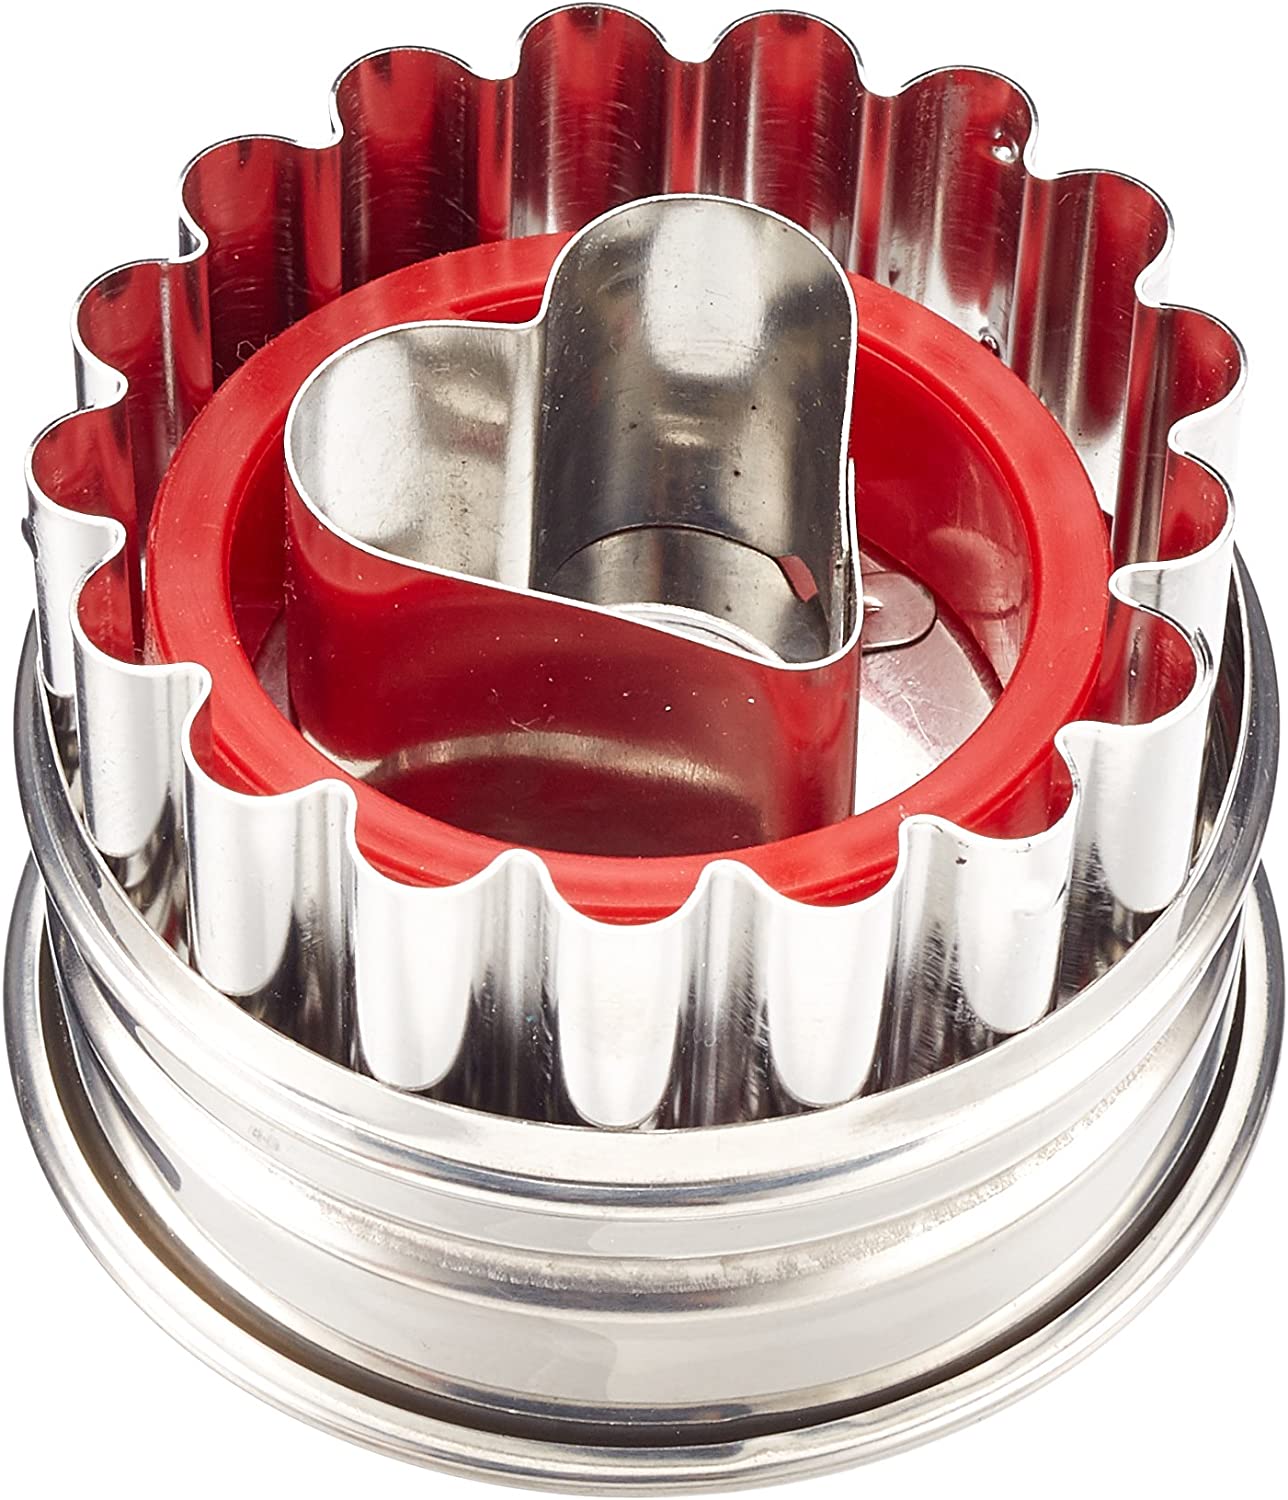 Staedter Städter Linzer with ejector Heart Diameter 4.8 cm Stainless Steel Silver Red 4.8 x 4.8 x 4.8 cm